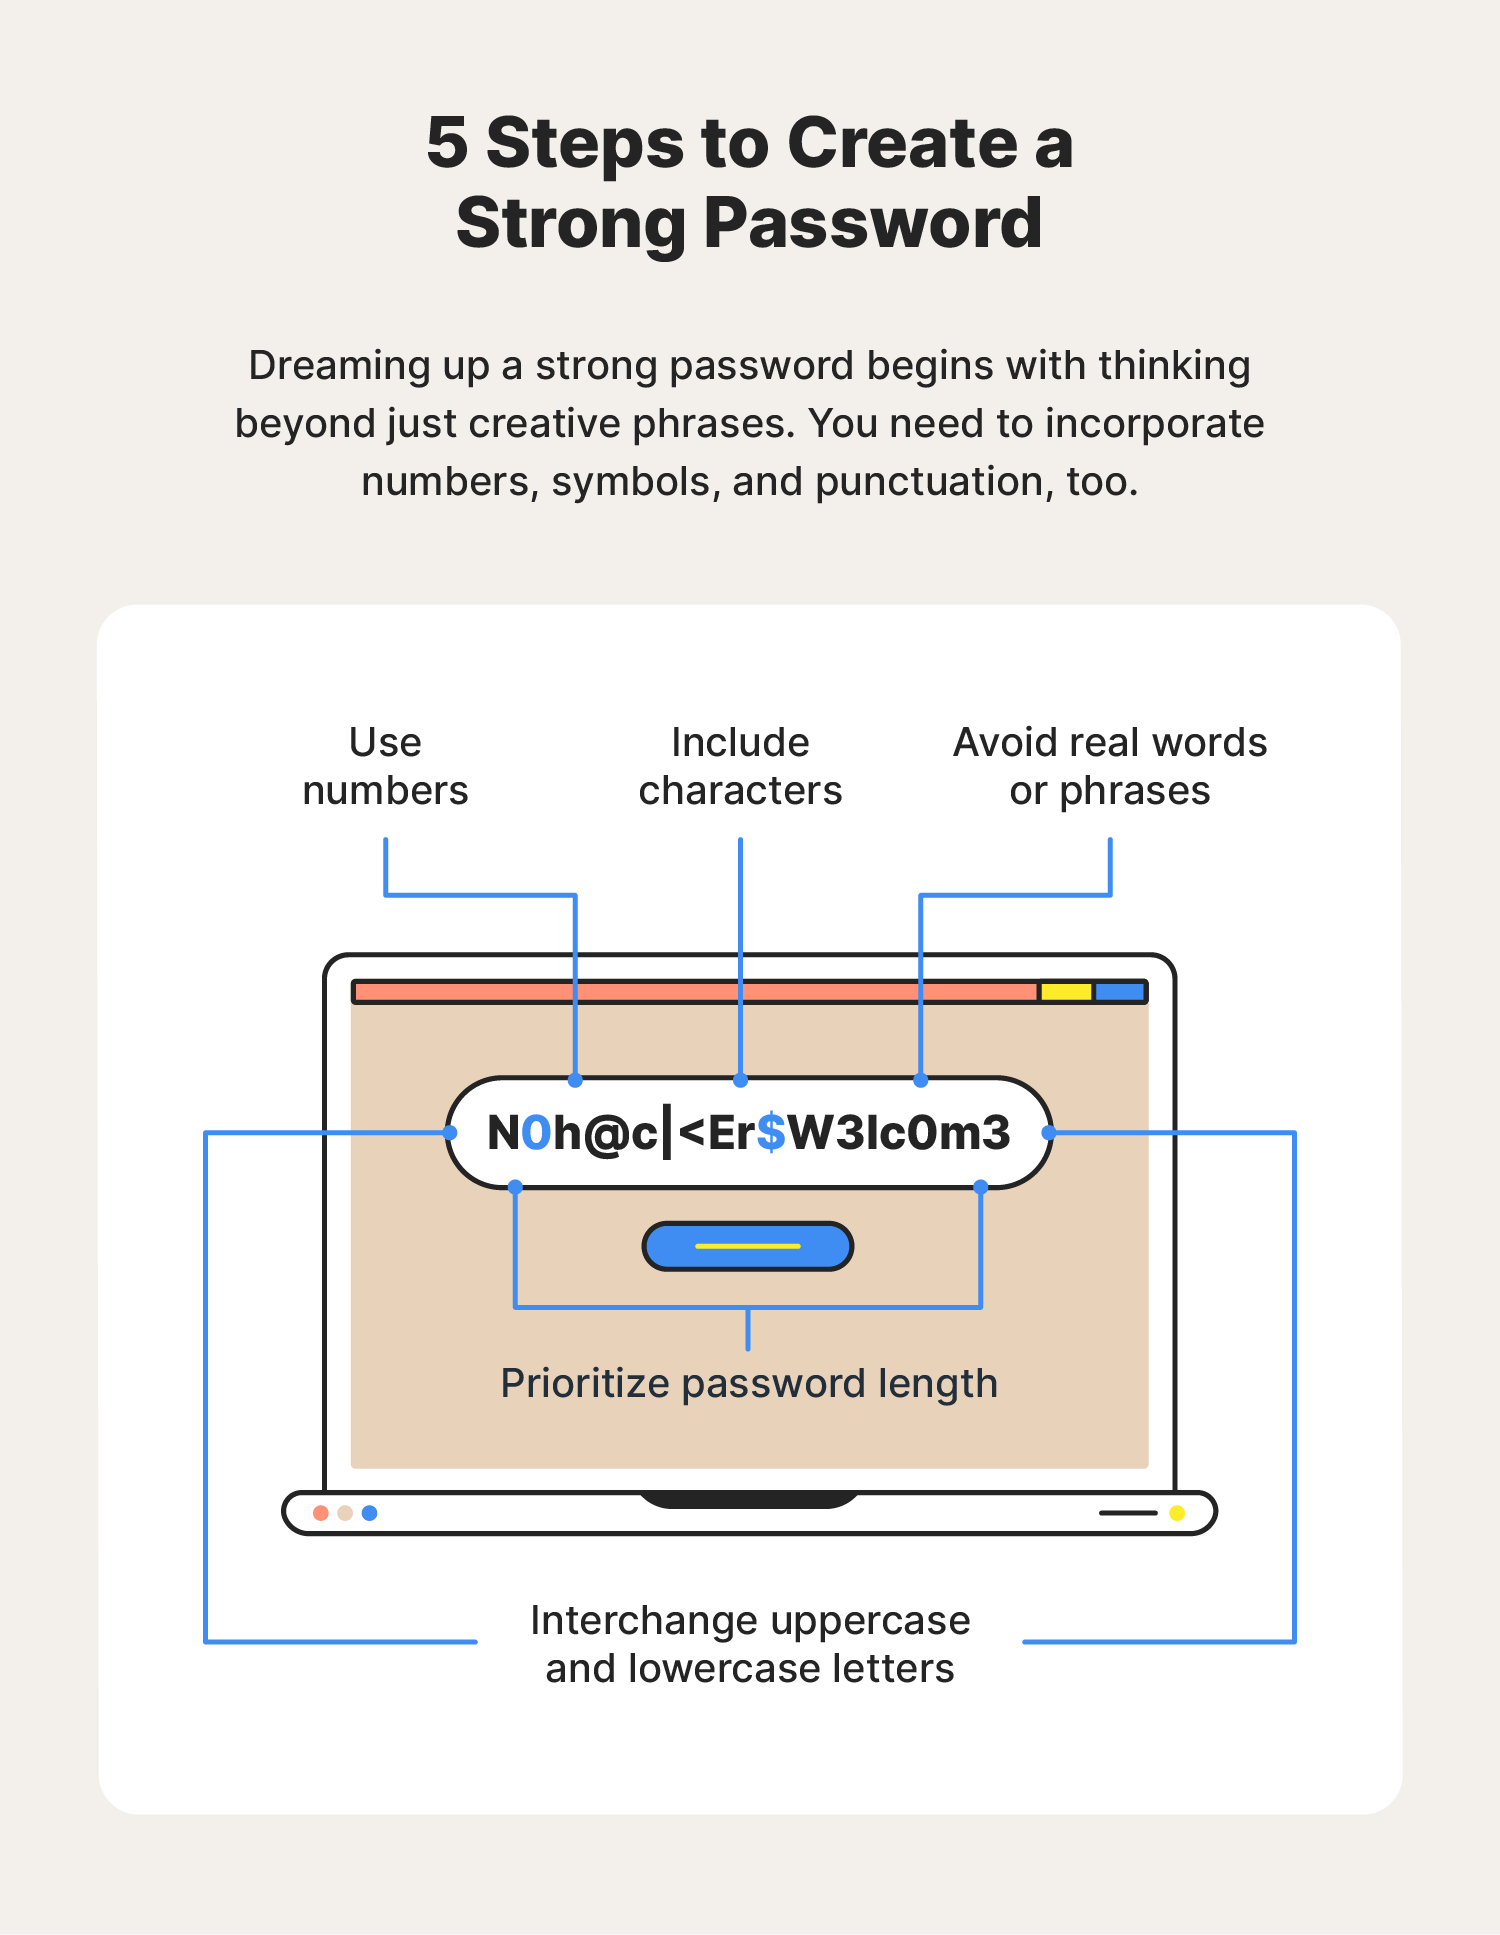 Use a strong password consisting of a combination of letters, numbers, and symbols.
Do not use the same password for multiple accounts or devices.